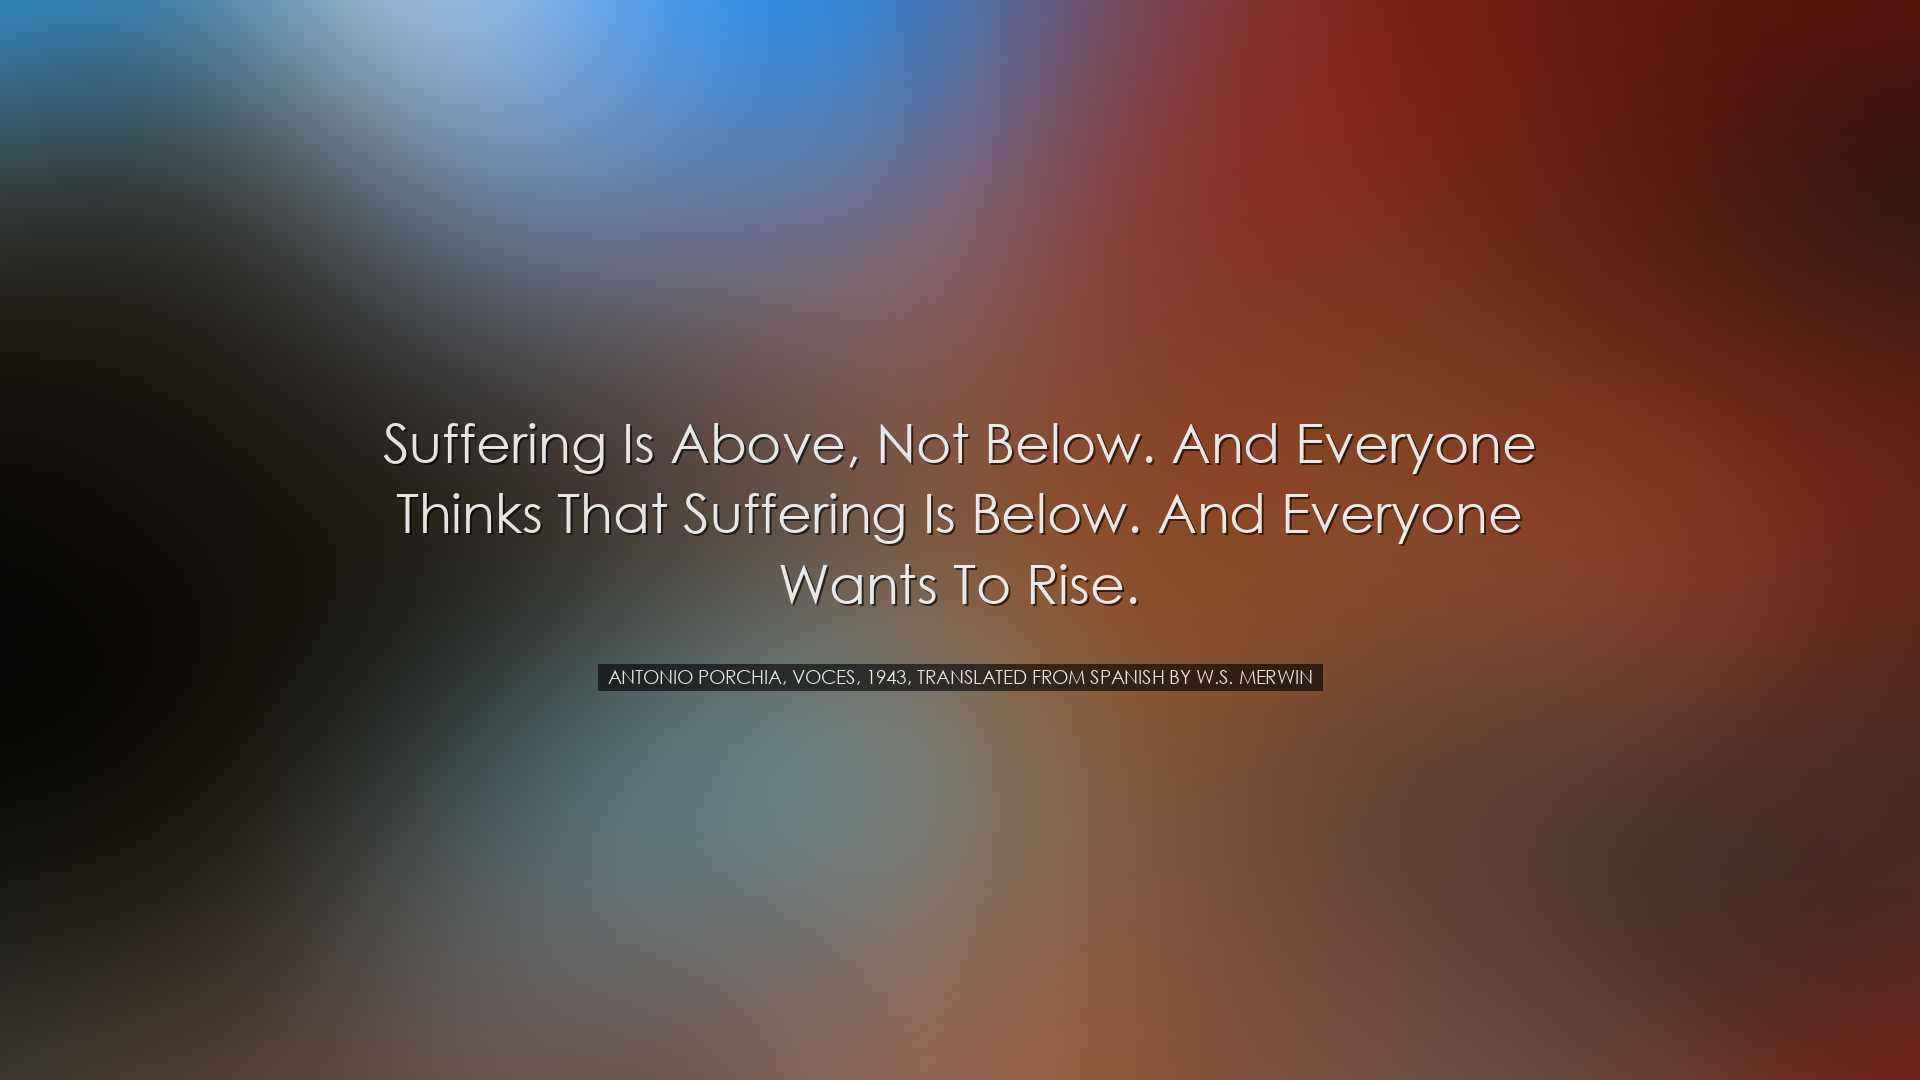 Suffering is above, not below. And everyone thinks that suffering